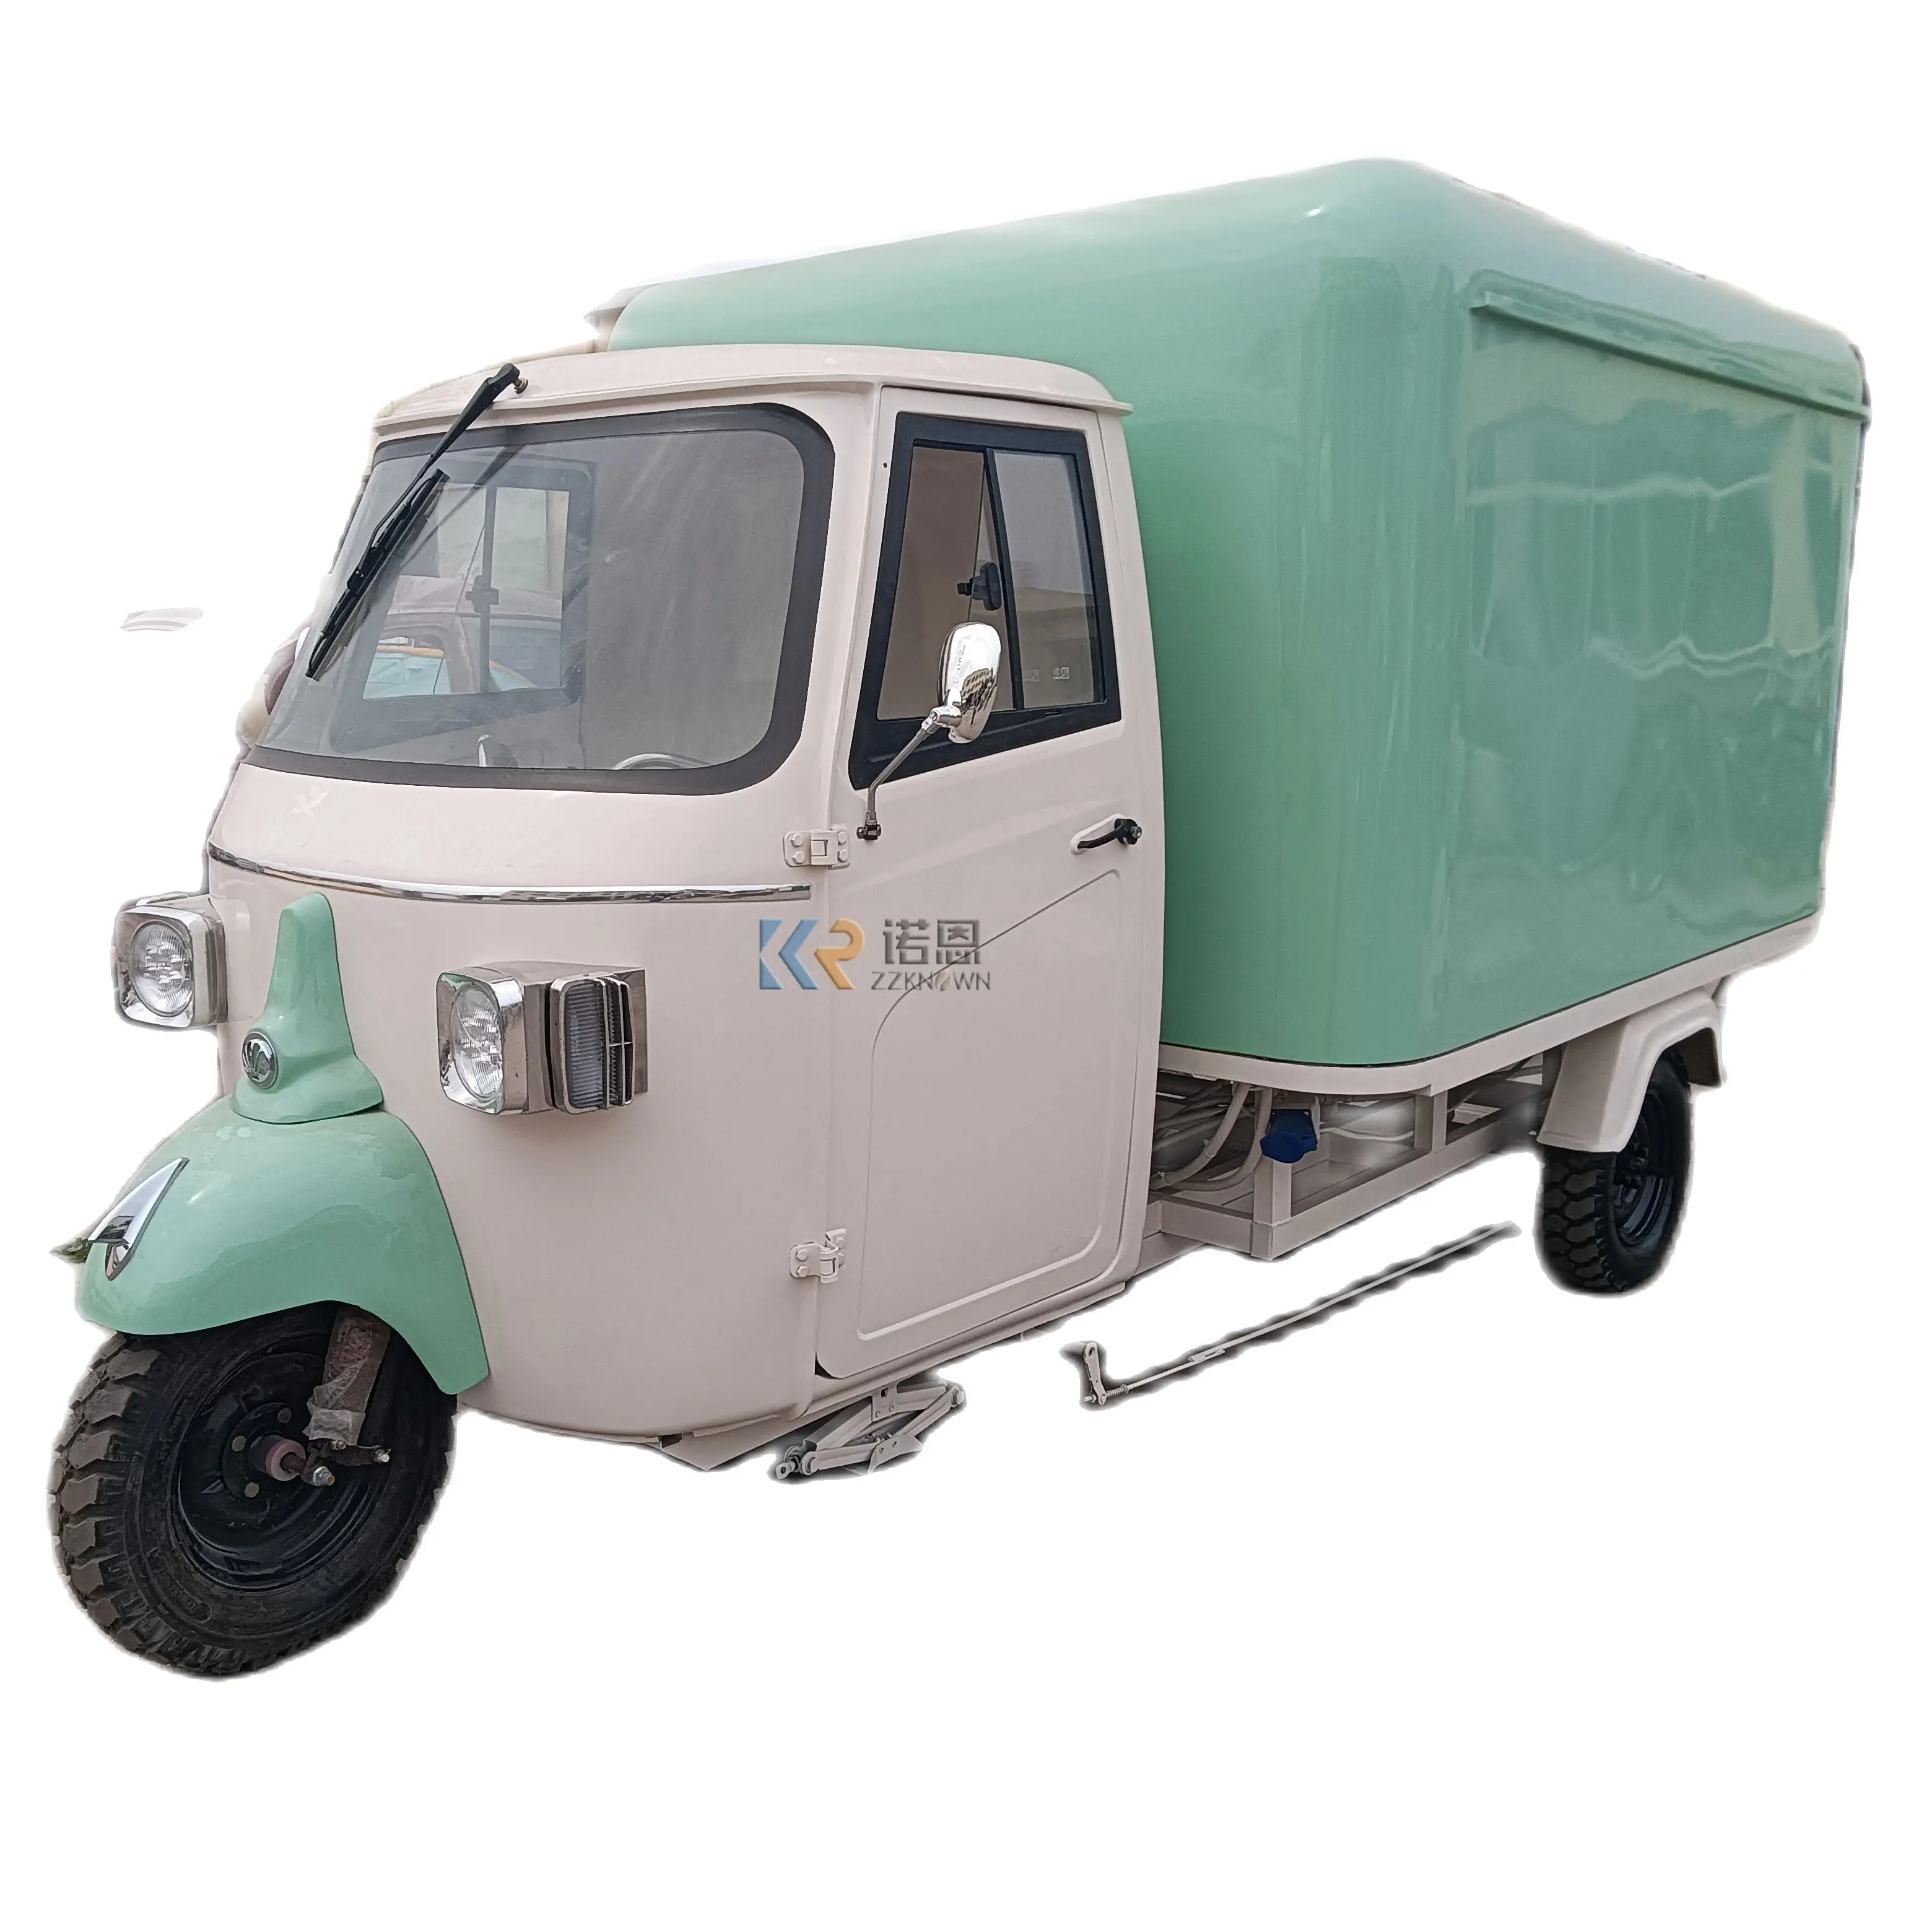 Three wheels Vending Electric Tricycle Snack Food Cart Mobile Breakfast Snack Food Truck Trailer for sale